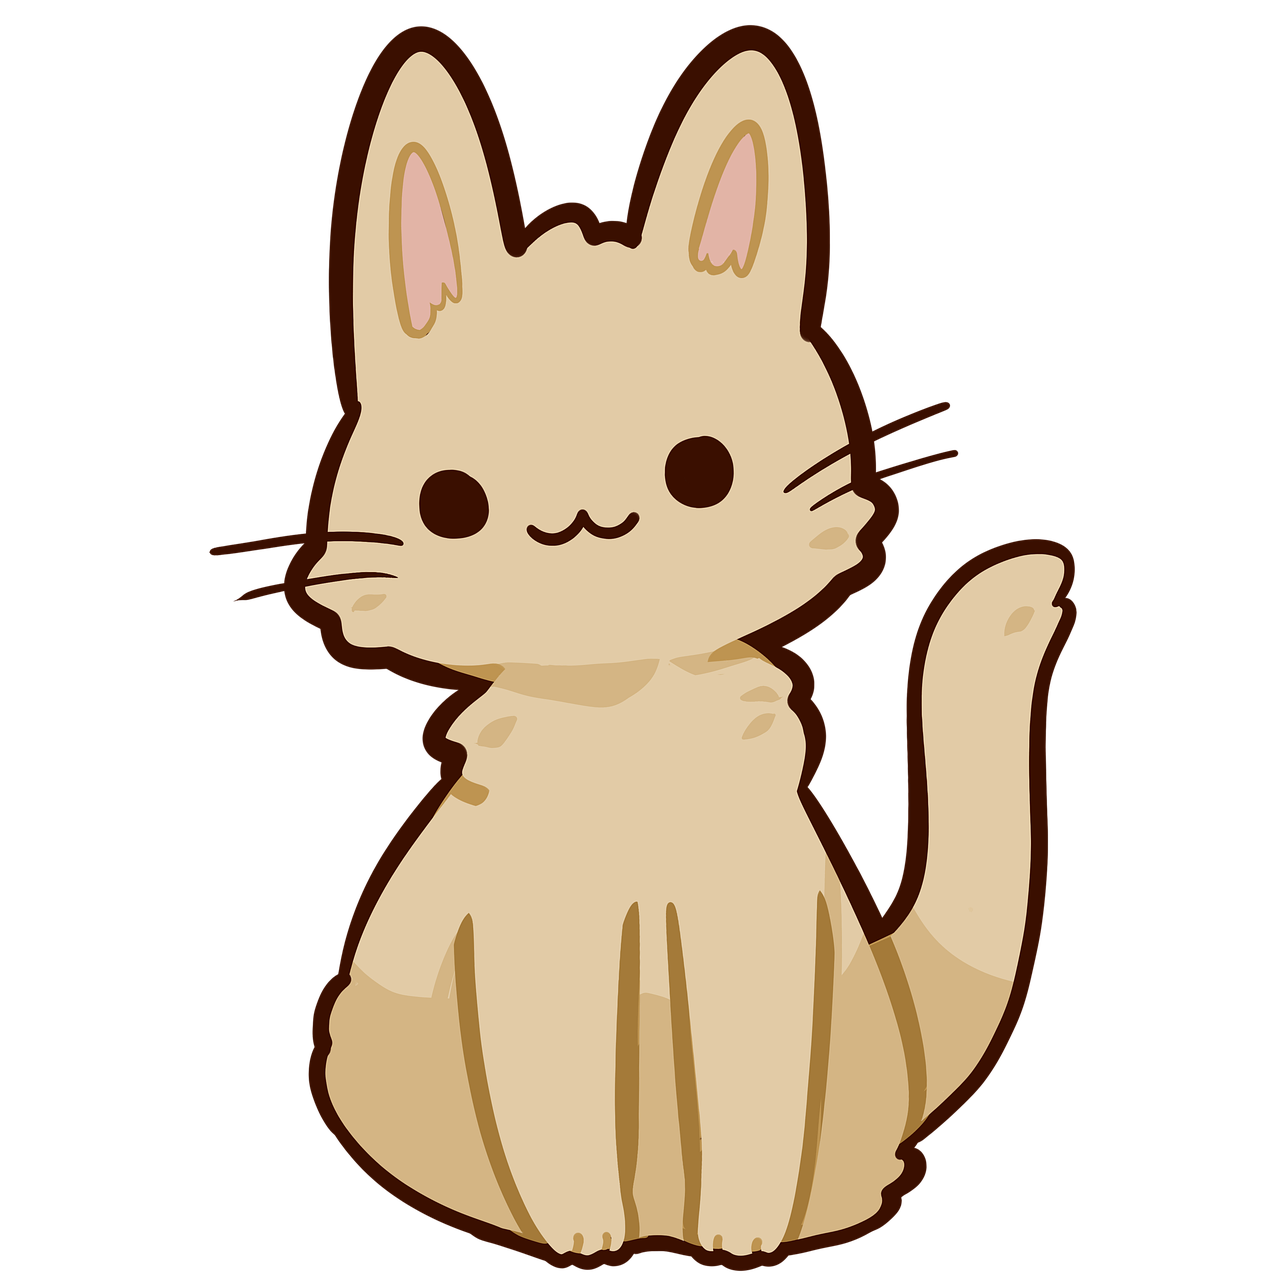 Download Free 100 + cute animated cat